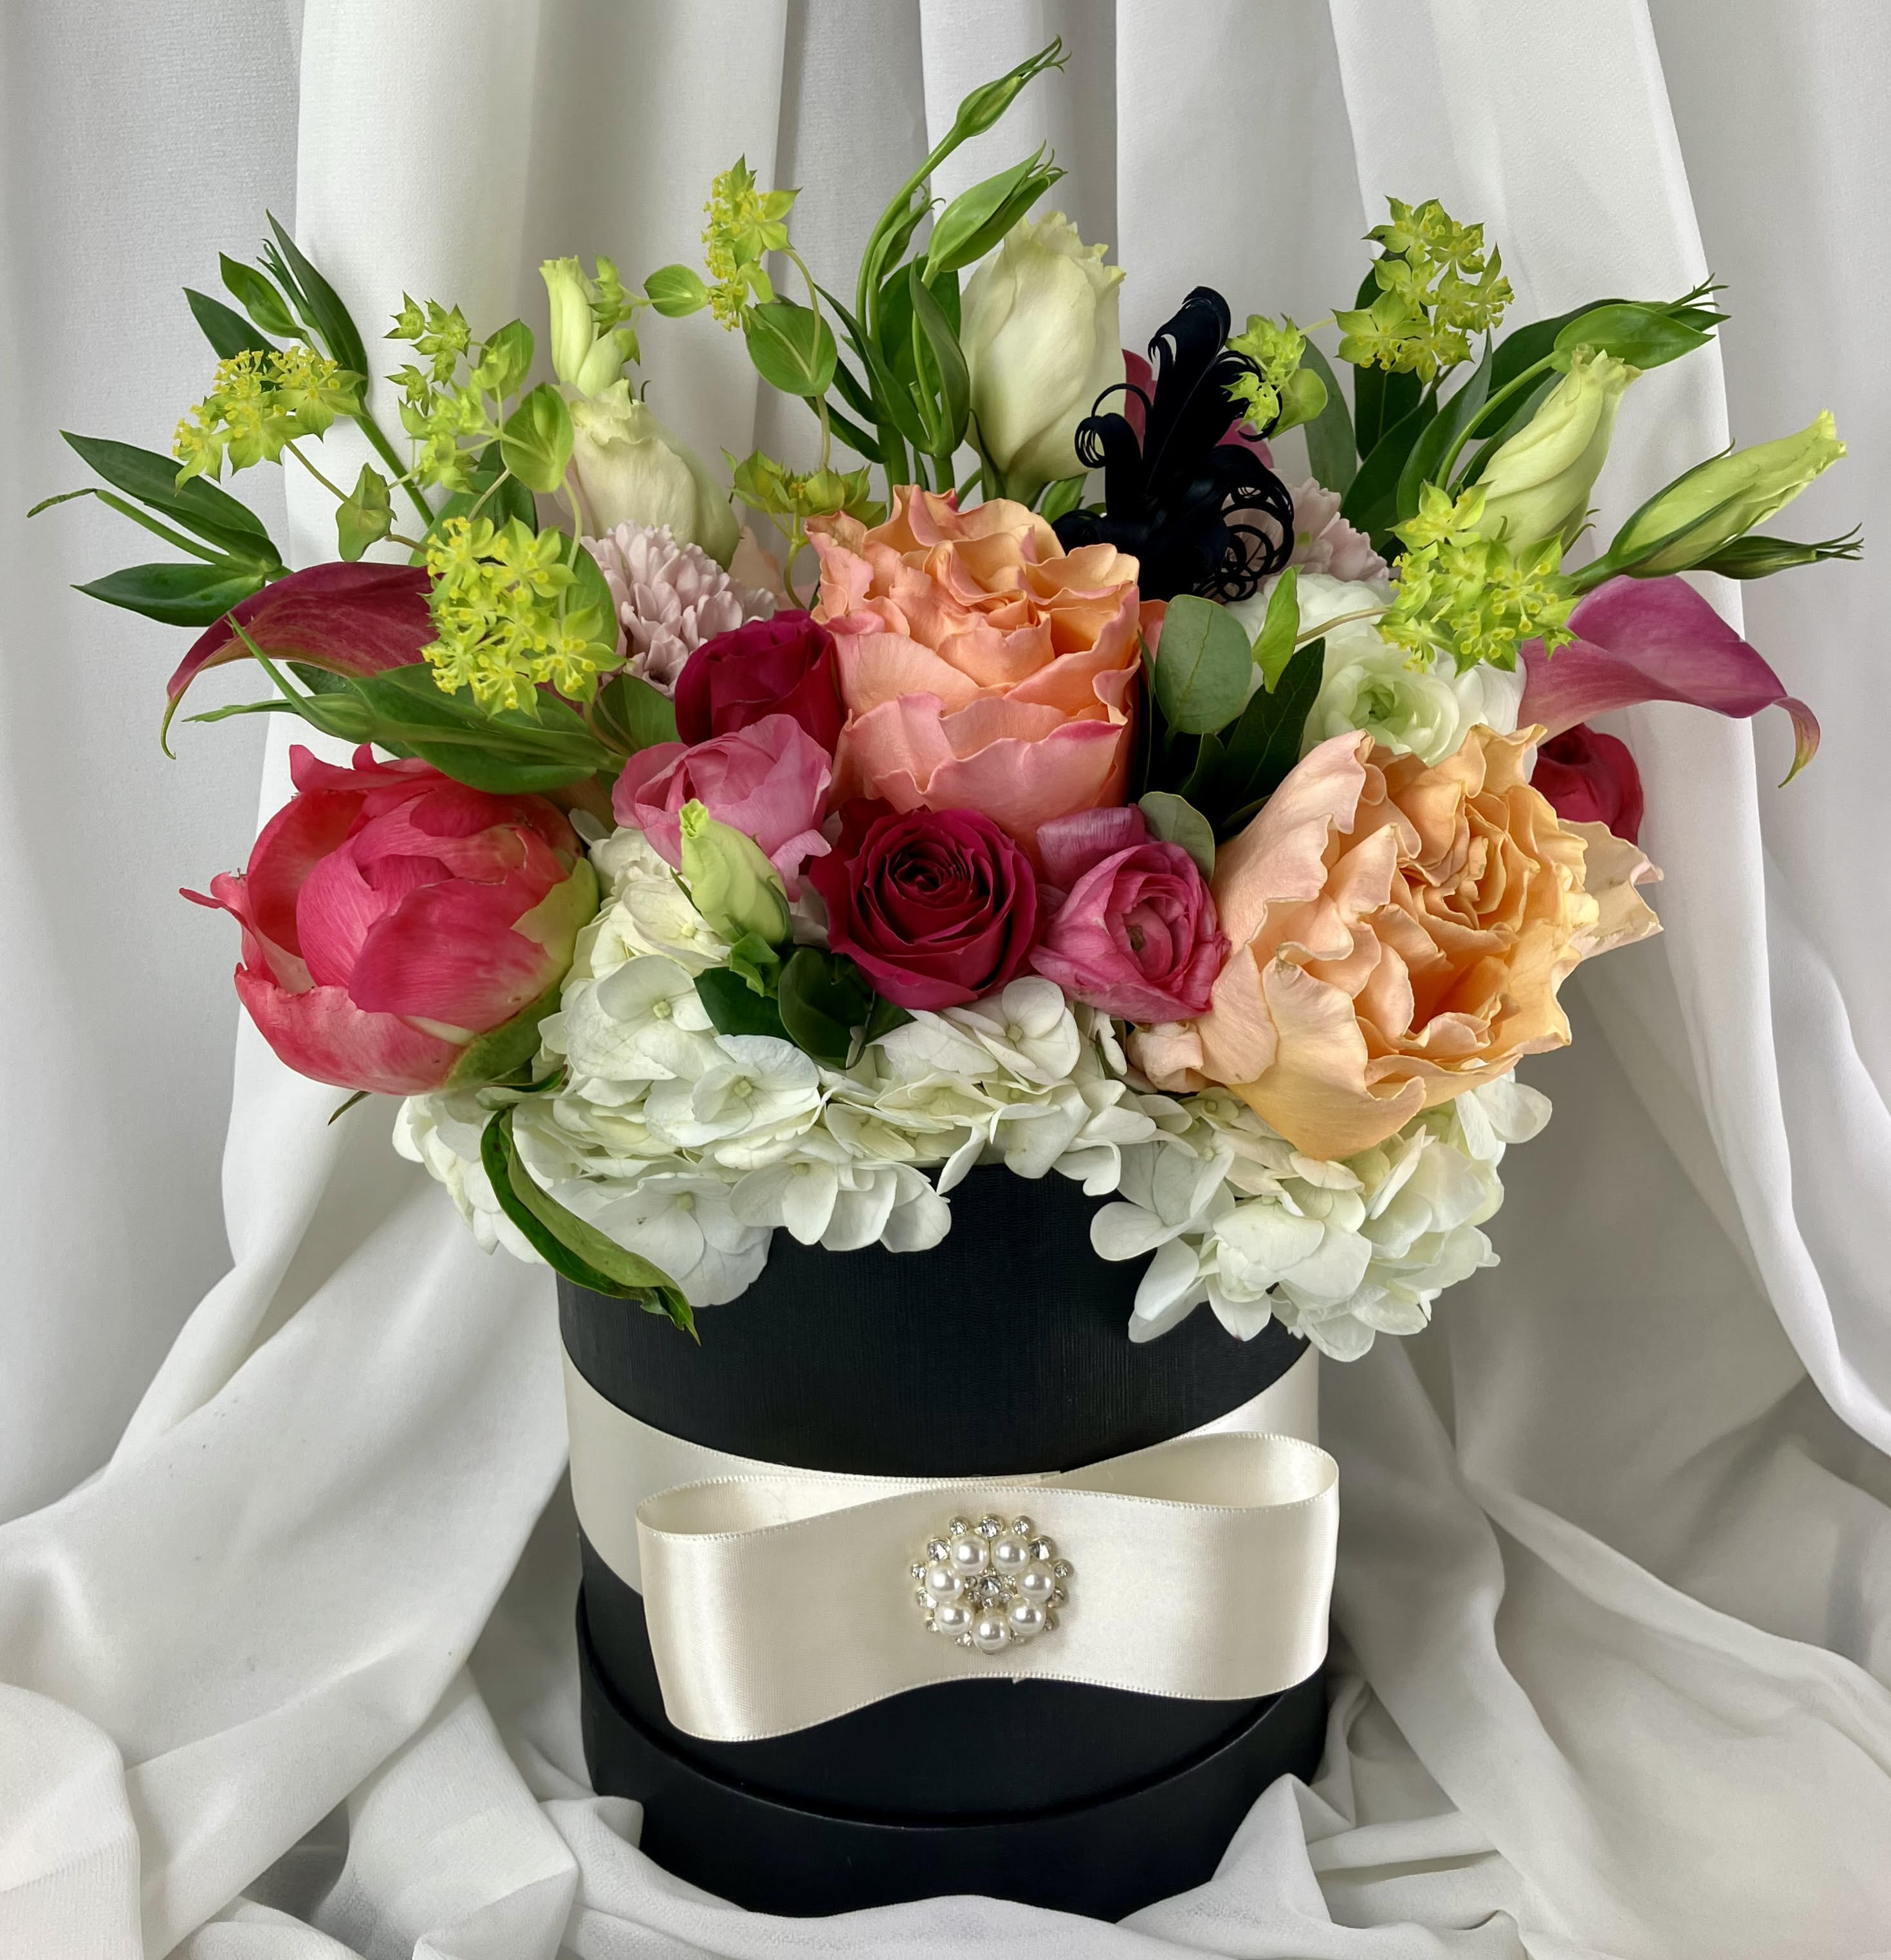 Vintage Hat Box -  Our unique vintage hat box is filled with the seasons freshest and most luxurious florals in our weekly color palette. Our deluxe version includes additional luxurious blooms and orchids.  As always, guaranteed to take your recipients breath away!   THANK YOU for entrusting us with your very special occasion. We take every order personally as if it were going to our own family.  FOR SAME DAY DELIVERY FOR ZIP CODE 76262, PLEASE ORDER BY 2:00 PM. FOR ALL OTHER SURROUNDING ZIP CODES, PLEASE ORDER BY 1:00 PM. All deliveries are made in the afternoons between 1:00 PM - 5:00 PM. If your delivery needs to be at a specified time, we offer &quot;timed delivery&quot; for a fee during the checkout process.  Please be sure to include the RECIPIENT'S CORRECT PHONE NUMBER, (not your phone number, this delays your delivery) gate codes or any other special instructions to ensure a smooth delivery. Due to unreliable Texas weather, House Of Flowers MUST call and schedule your delivery with the recipient. Flowers CAN NOT be left on the porch during the summer. Please try and make sure your recipient will be home at time of delivery. We will attempt delivery once and then offer them an in-studio pickup. Delivery charges are non-refundable. Our top priority is that your recipient receives the most luxurious and long lasting freshest florals they have ever seen. Thank you for your cooperation!